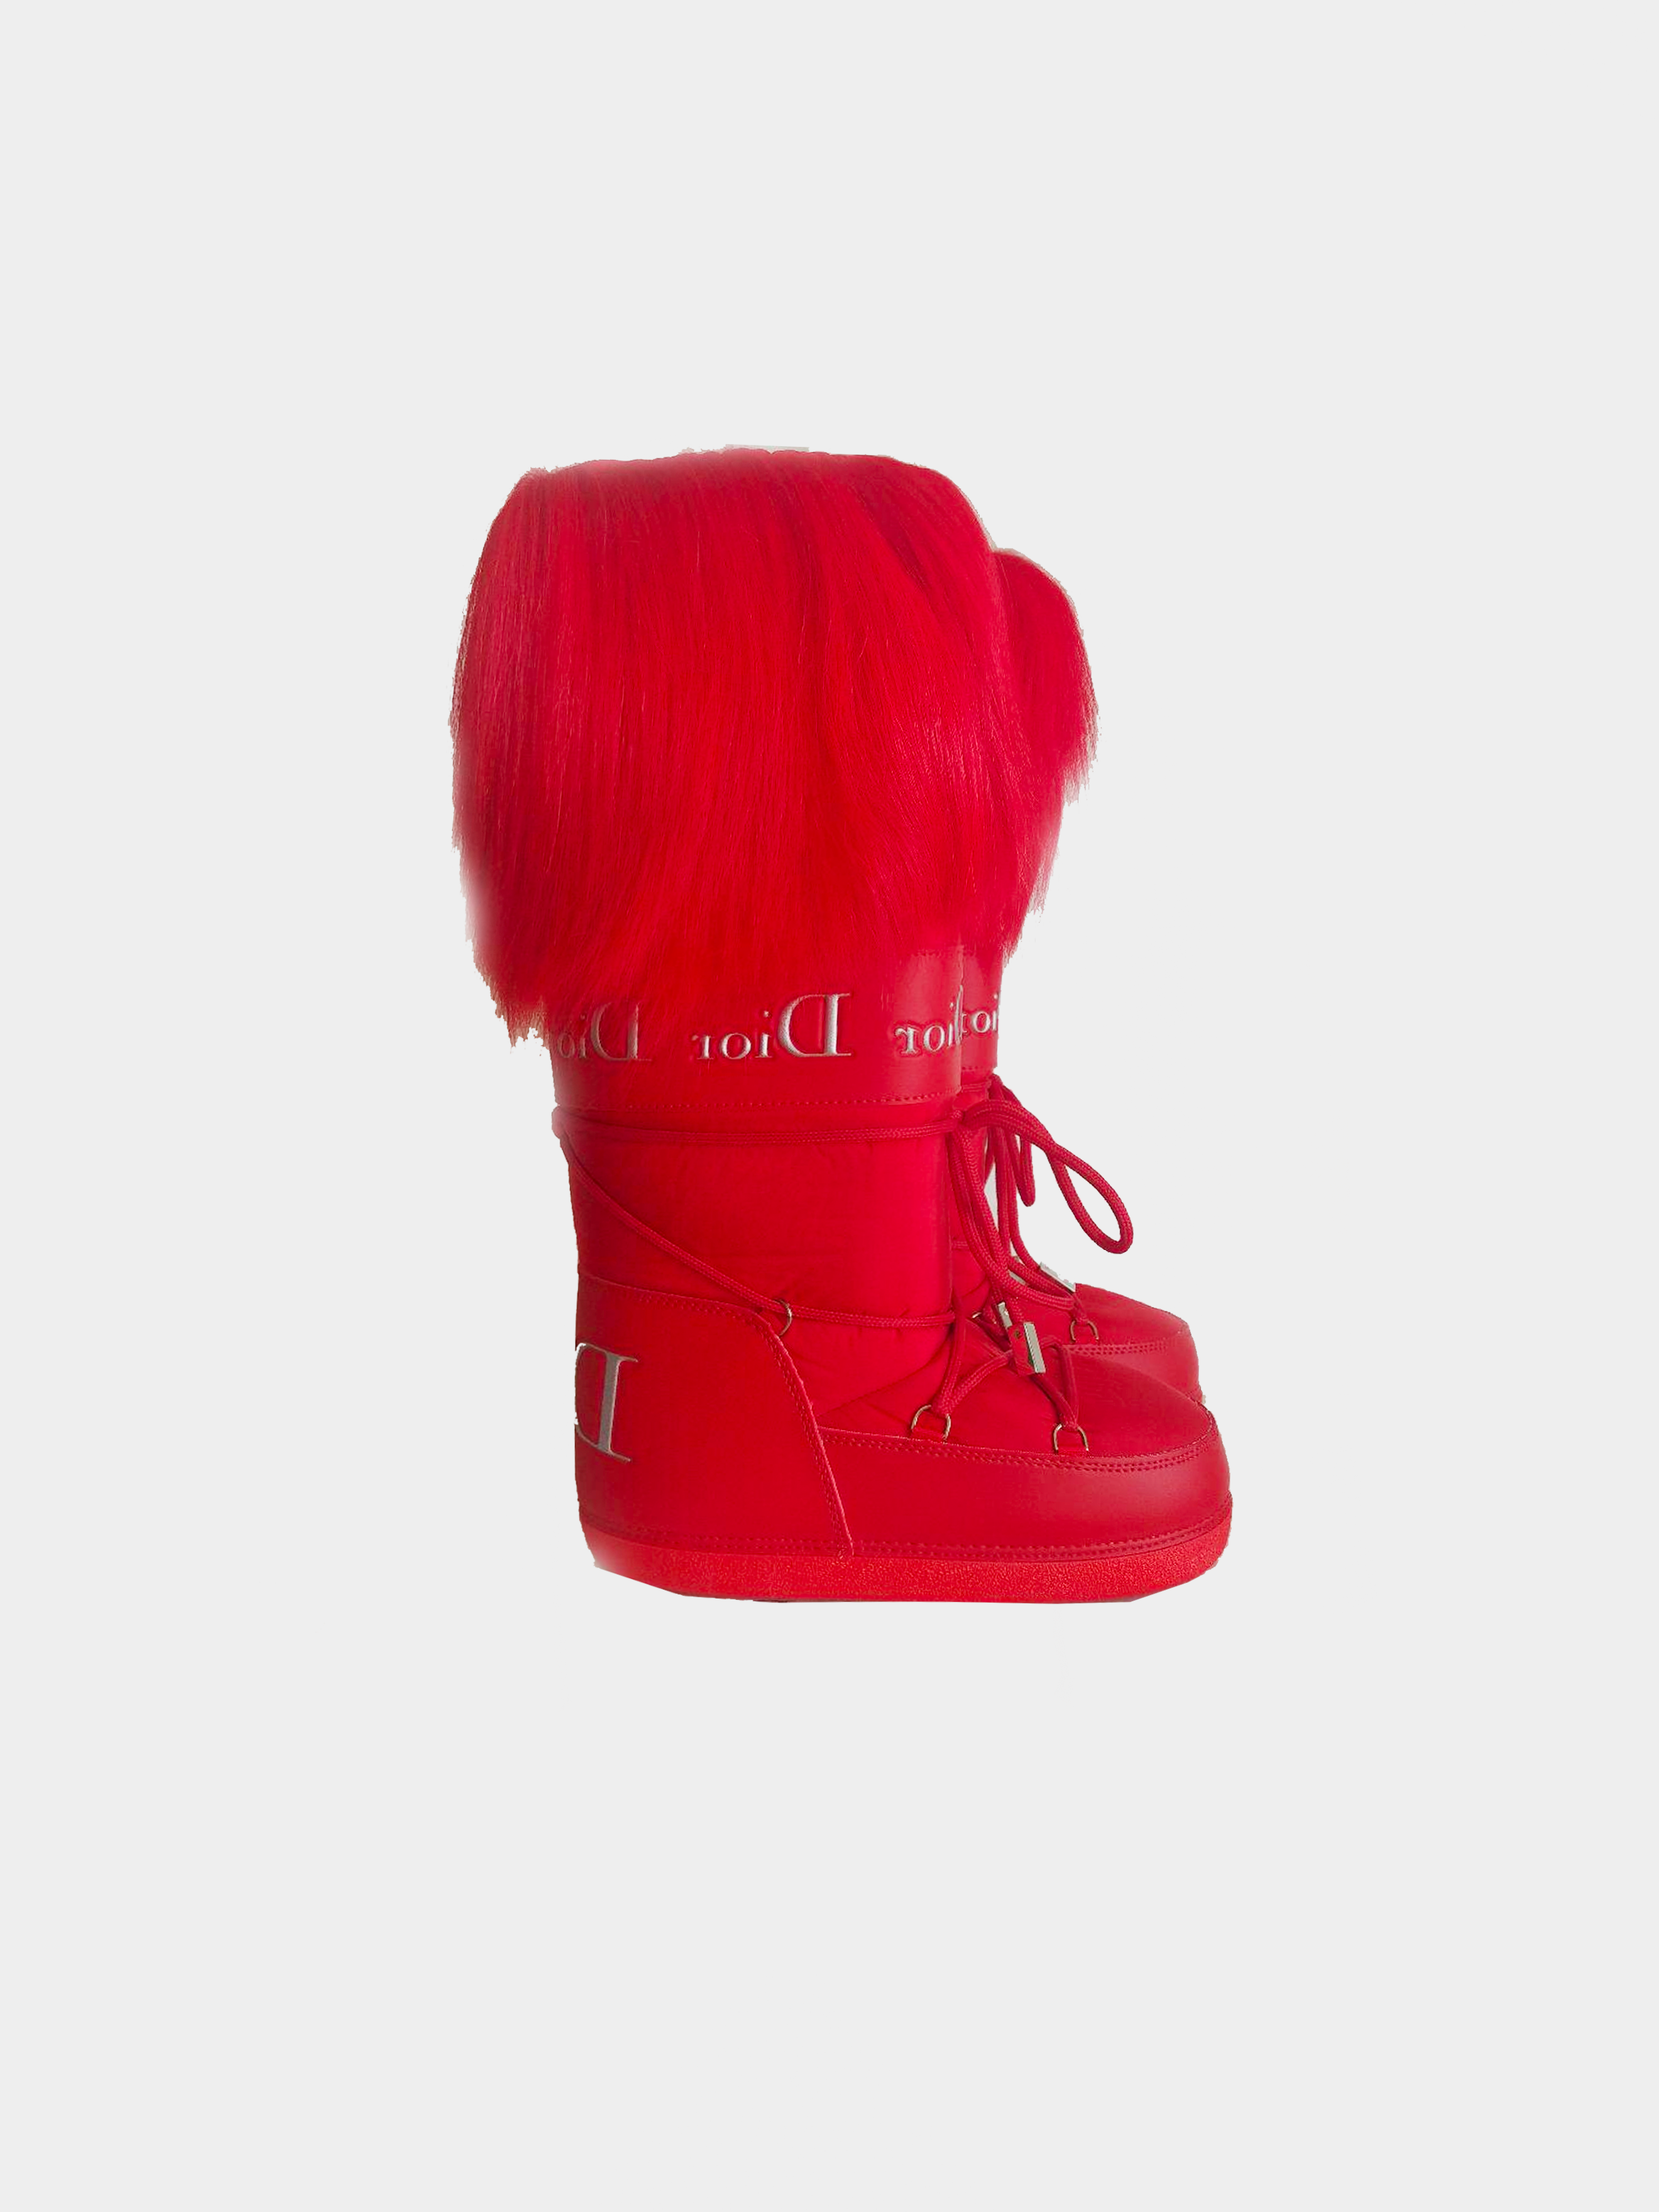 Christian Dior Red 2000s Rare Fur Moon Boots · INTO